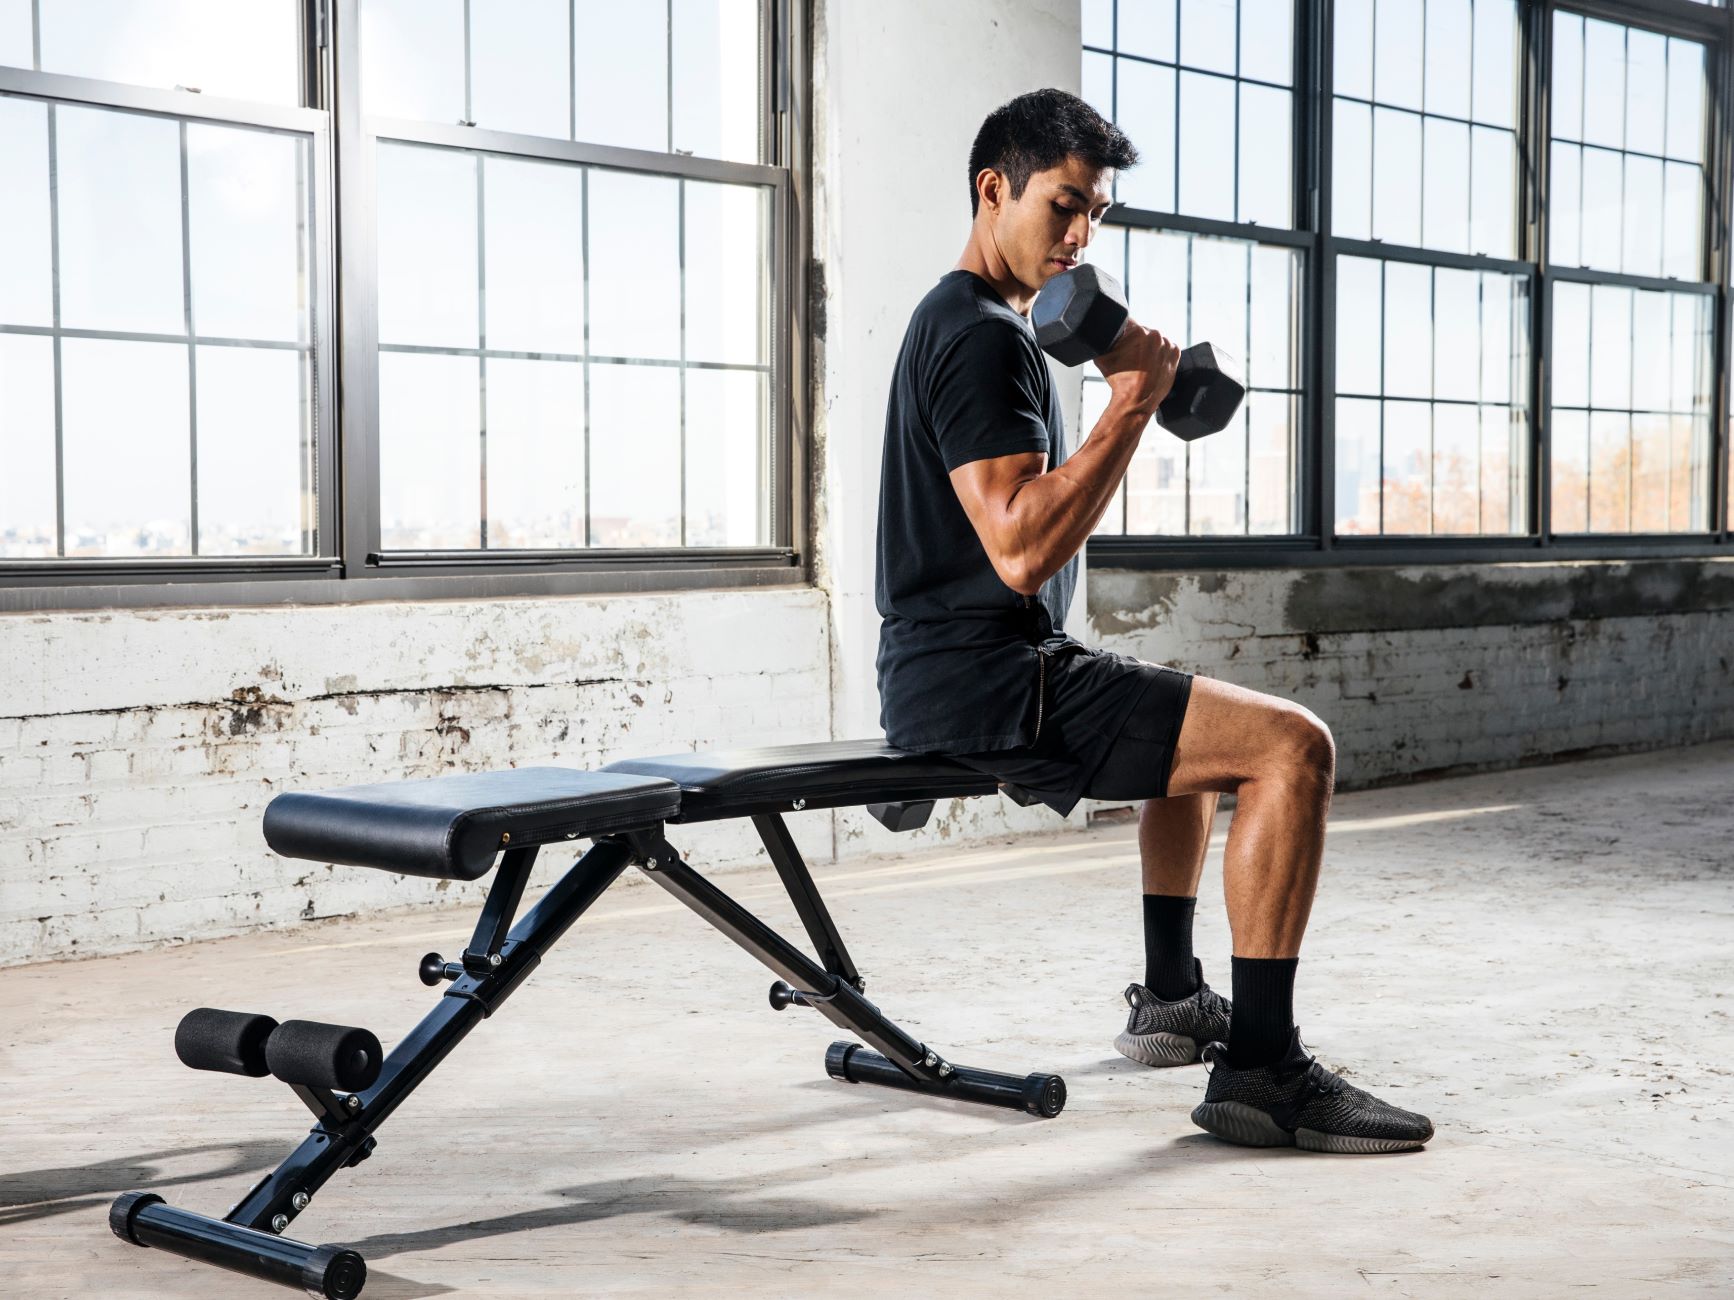 Building Up Your Base Fitness In 3 Simple Steps